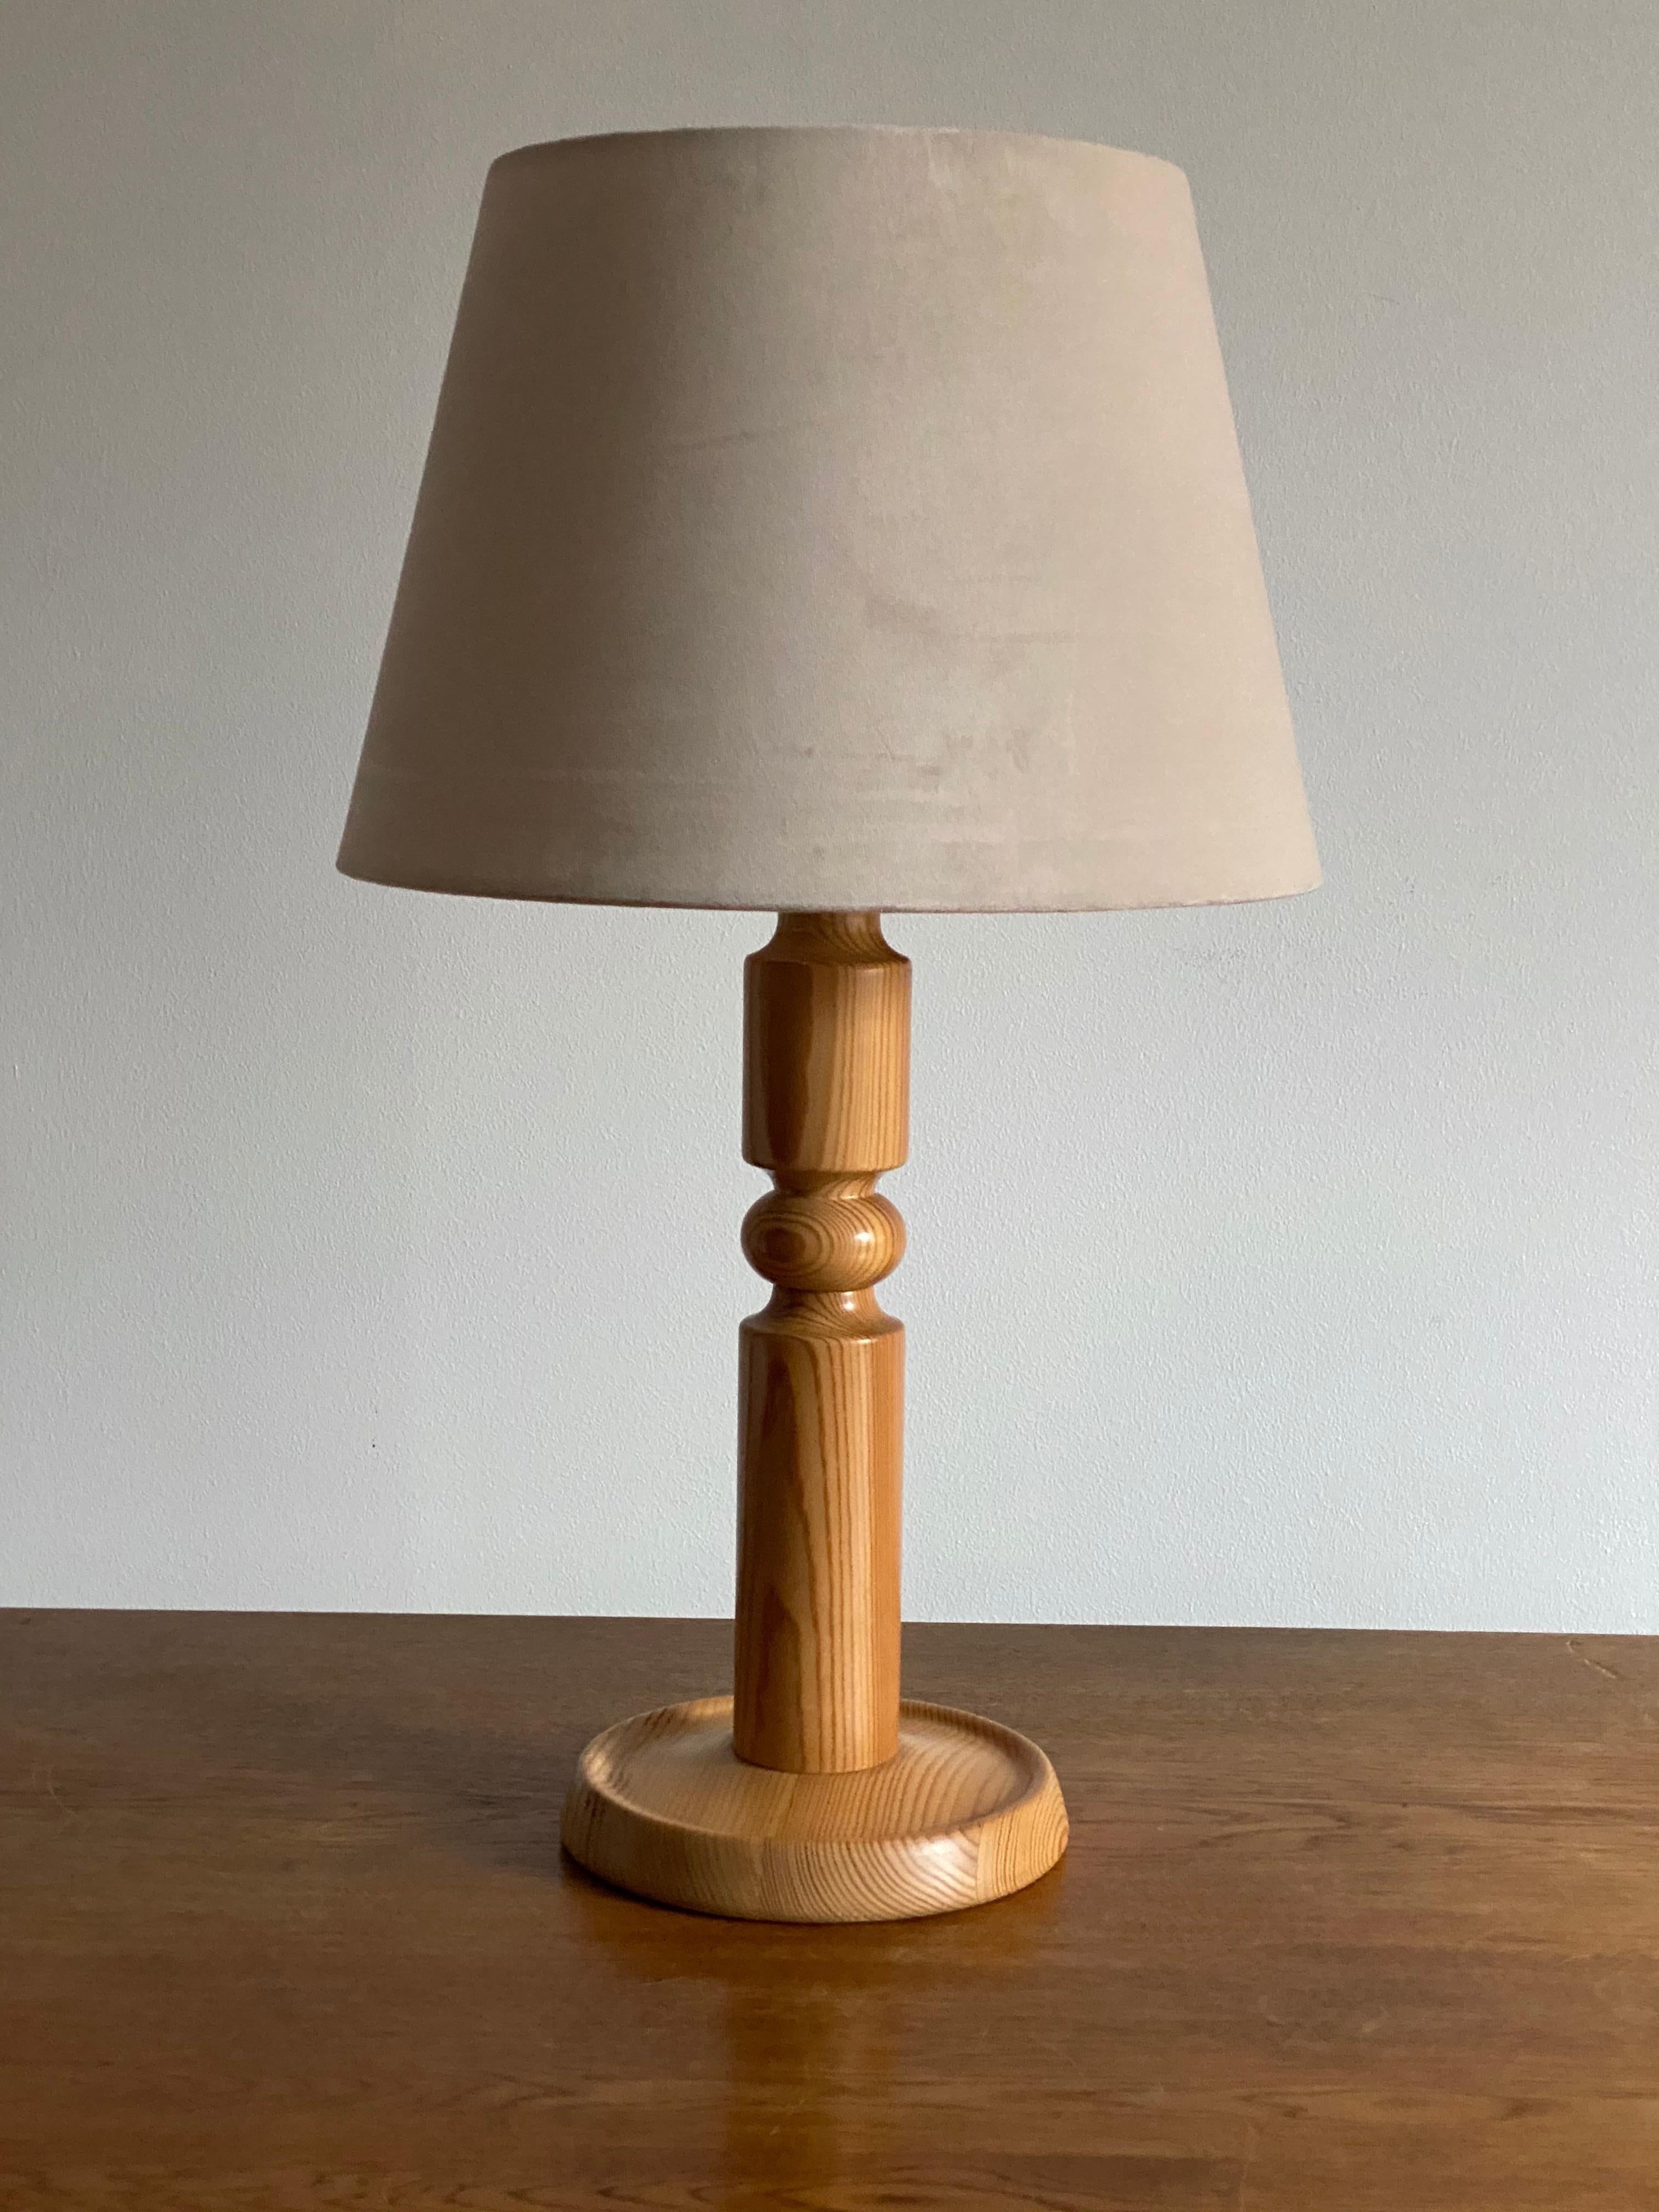 A sizable sculptural and Minimalist table lamp. Produced by Solbackens Svarveri. Sweden, circa 1970s.

In solid pine, all original condition.

Sold without lampshade. Stated dimensions are excluding lampshade.